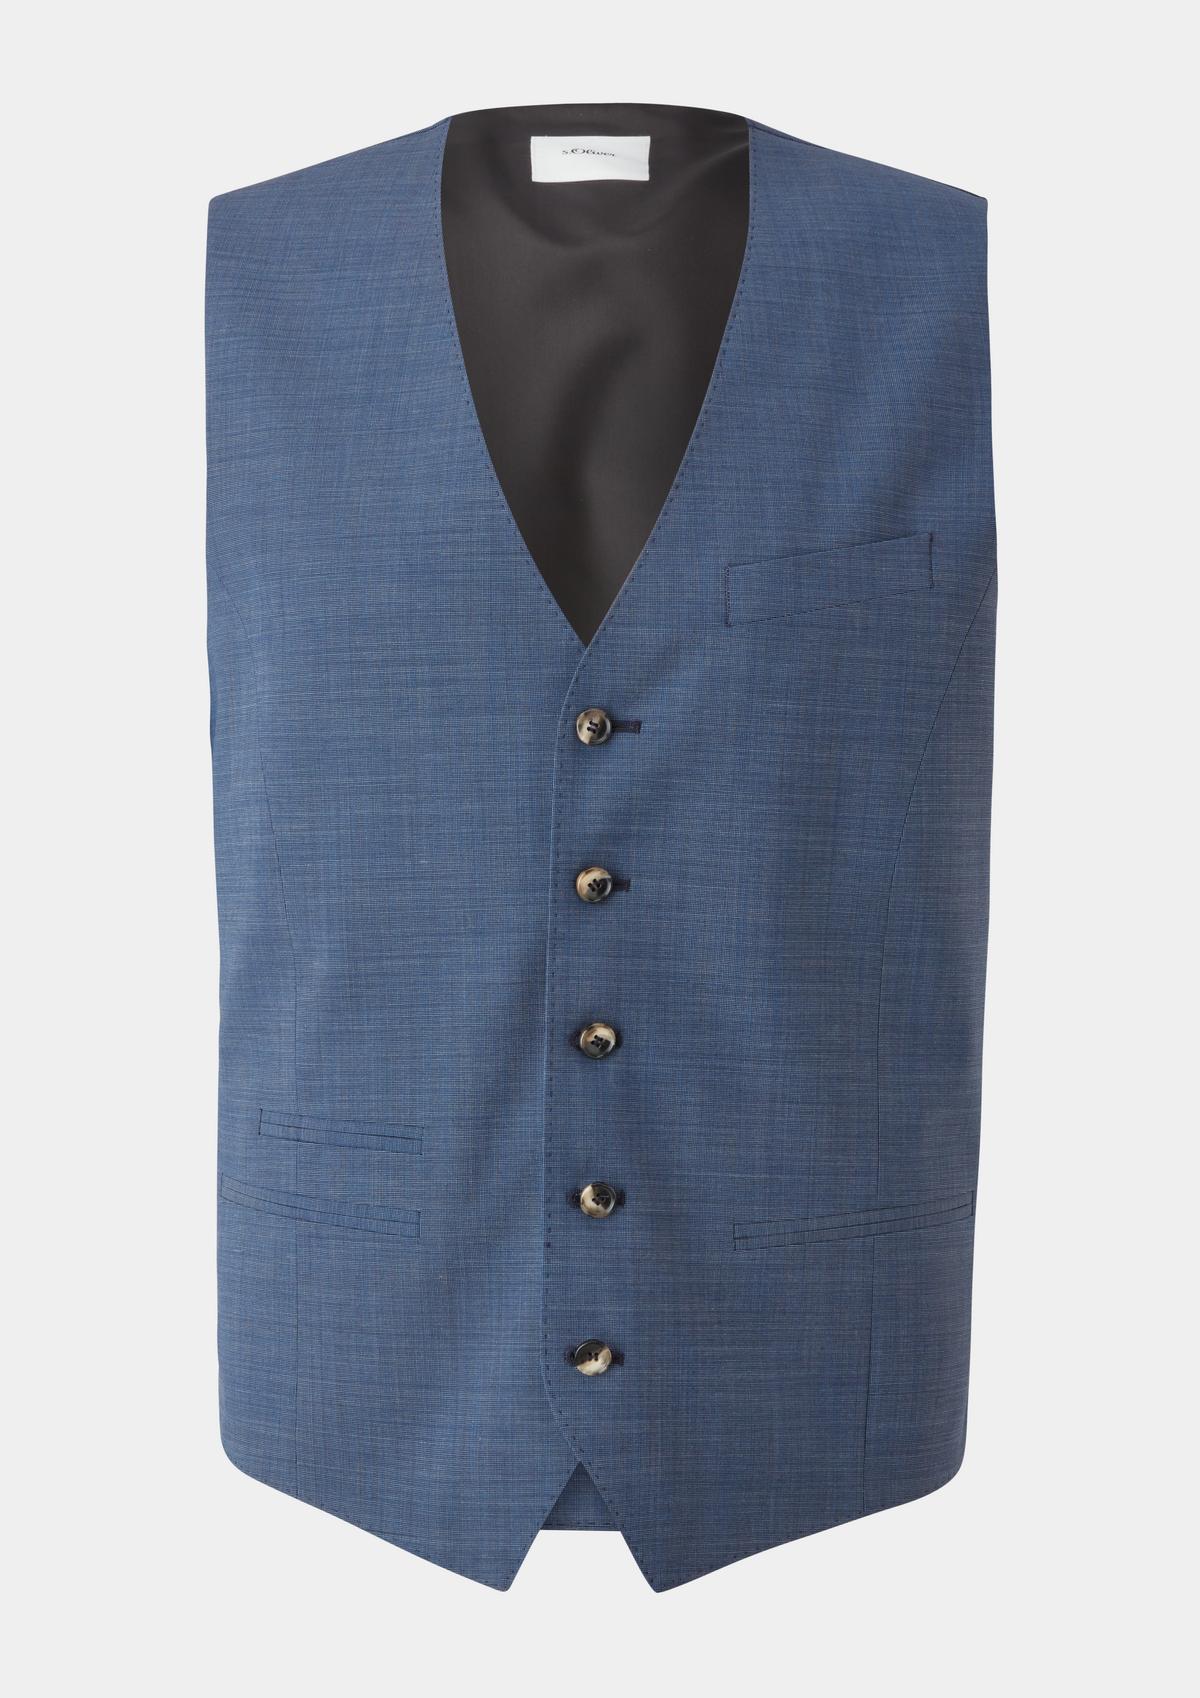 s.Oliver Slim: waistcoat in a classic style